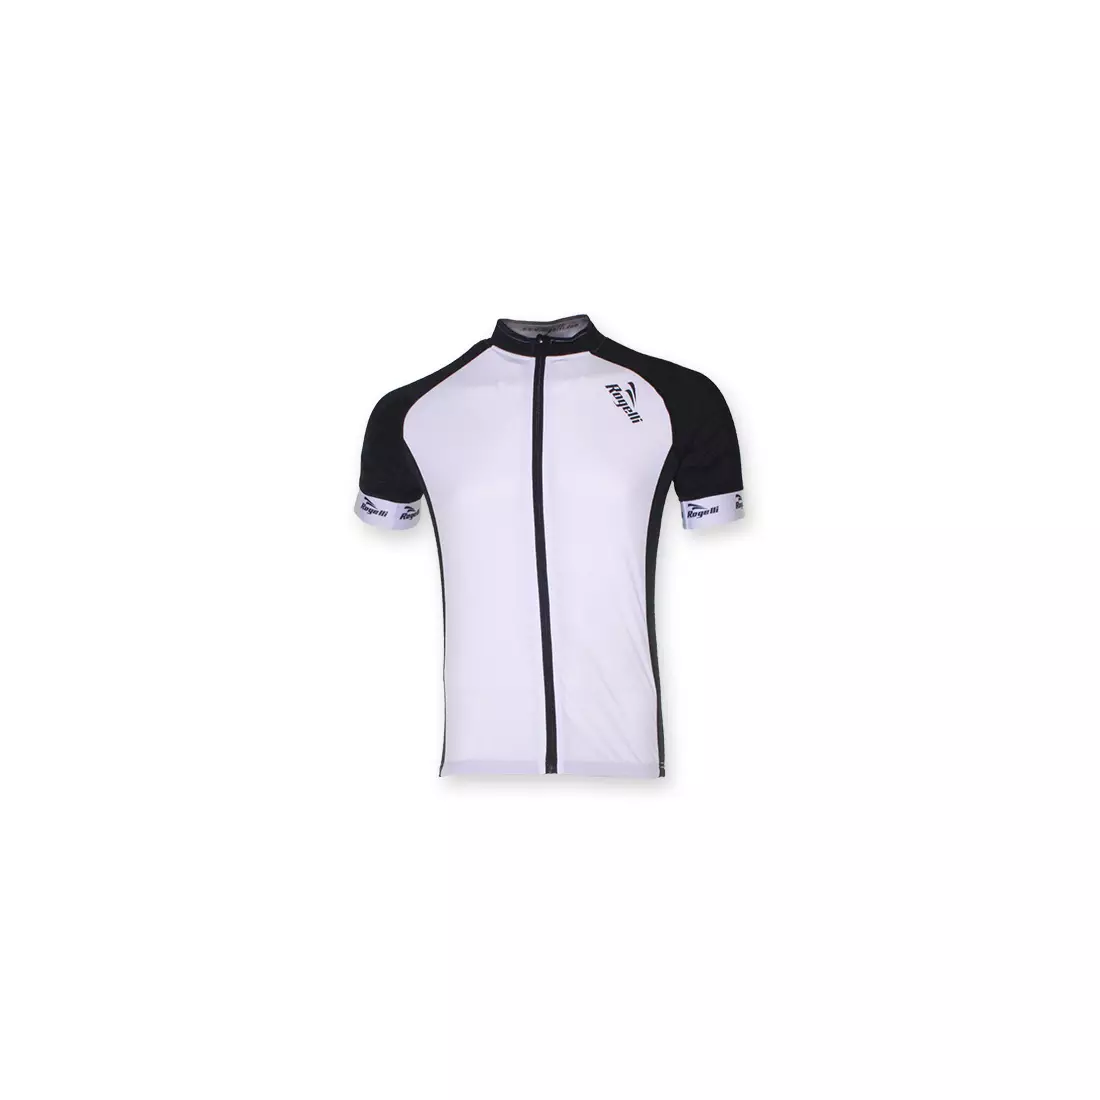 ROGELLI PRALI - men's cycling jersey, color: white and black